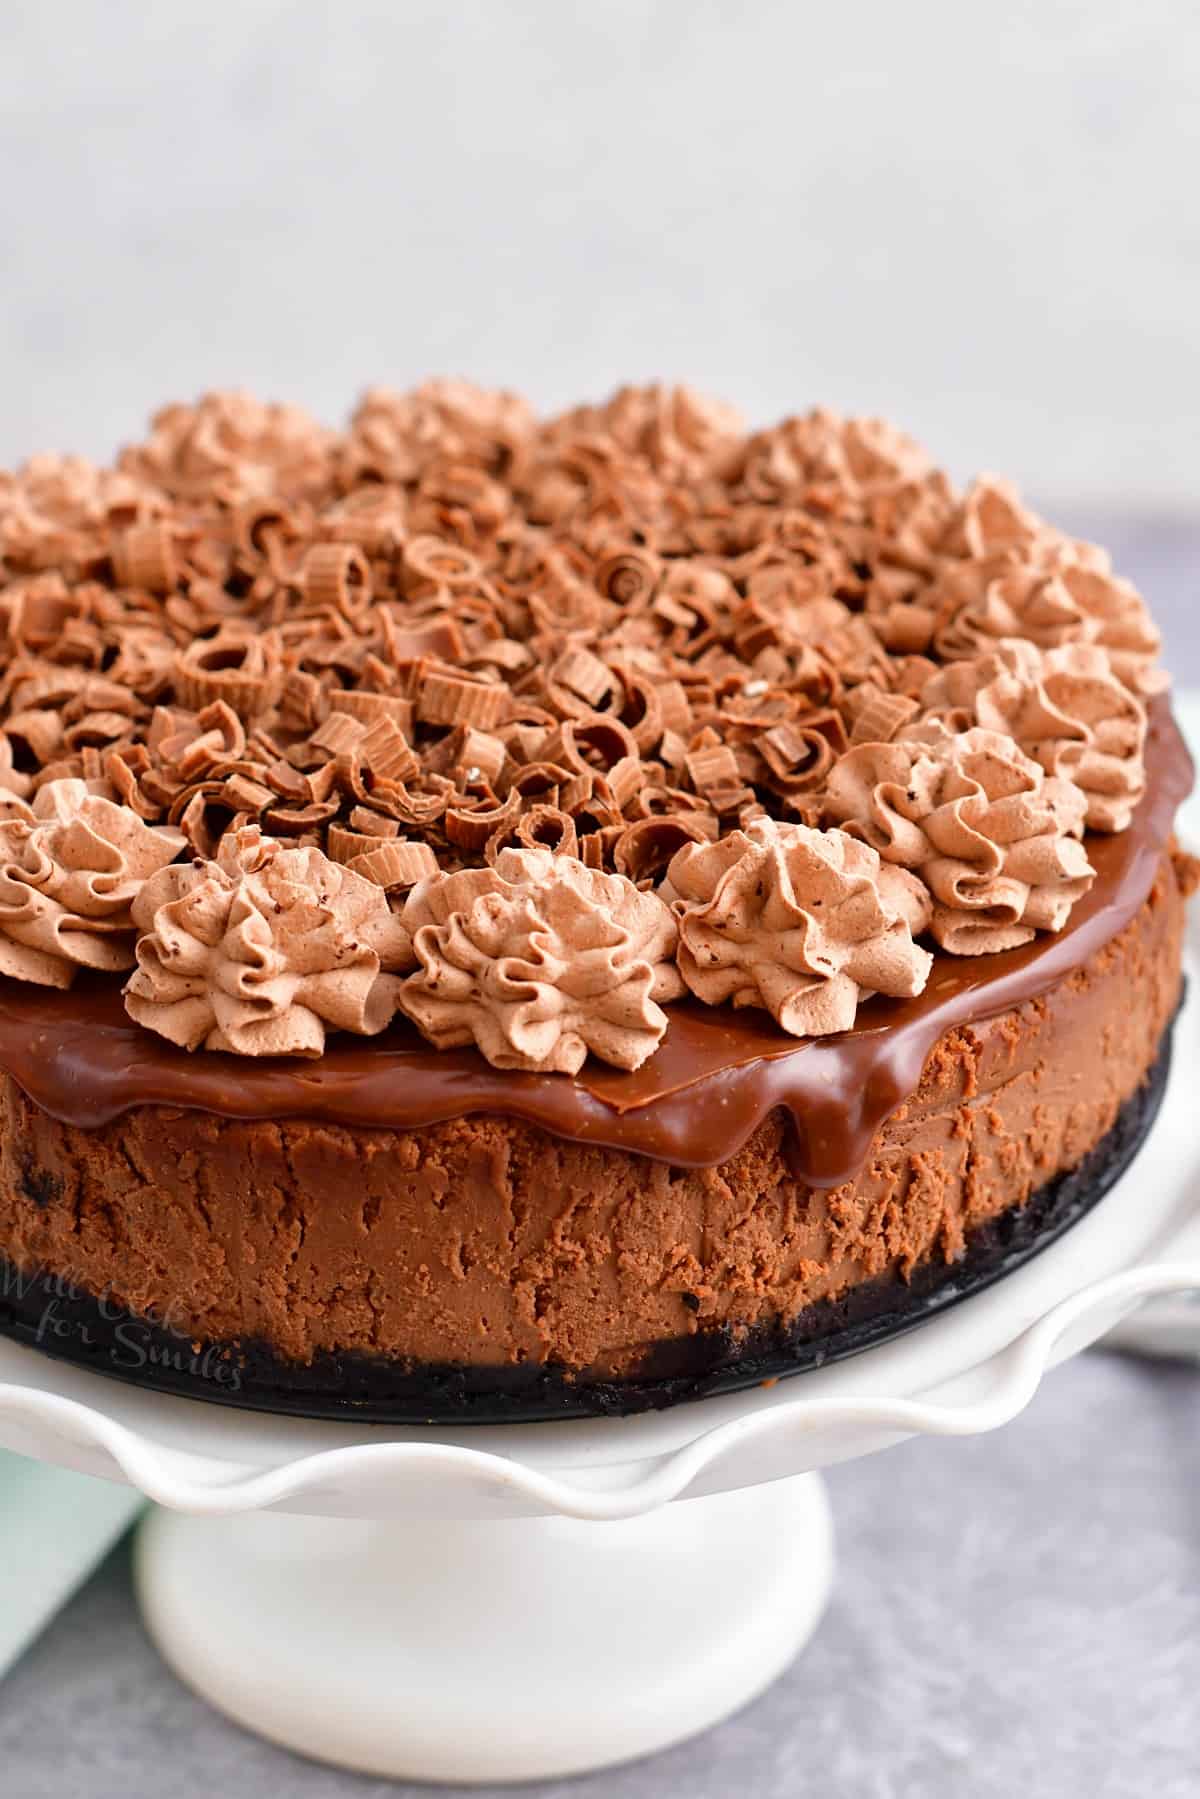 A chocolate cheesecake is beautifully topped with chocolate whipped cream.